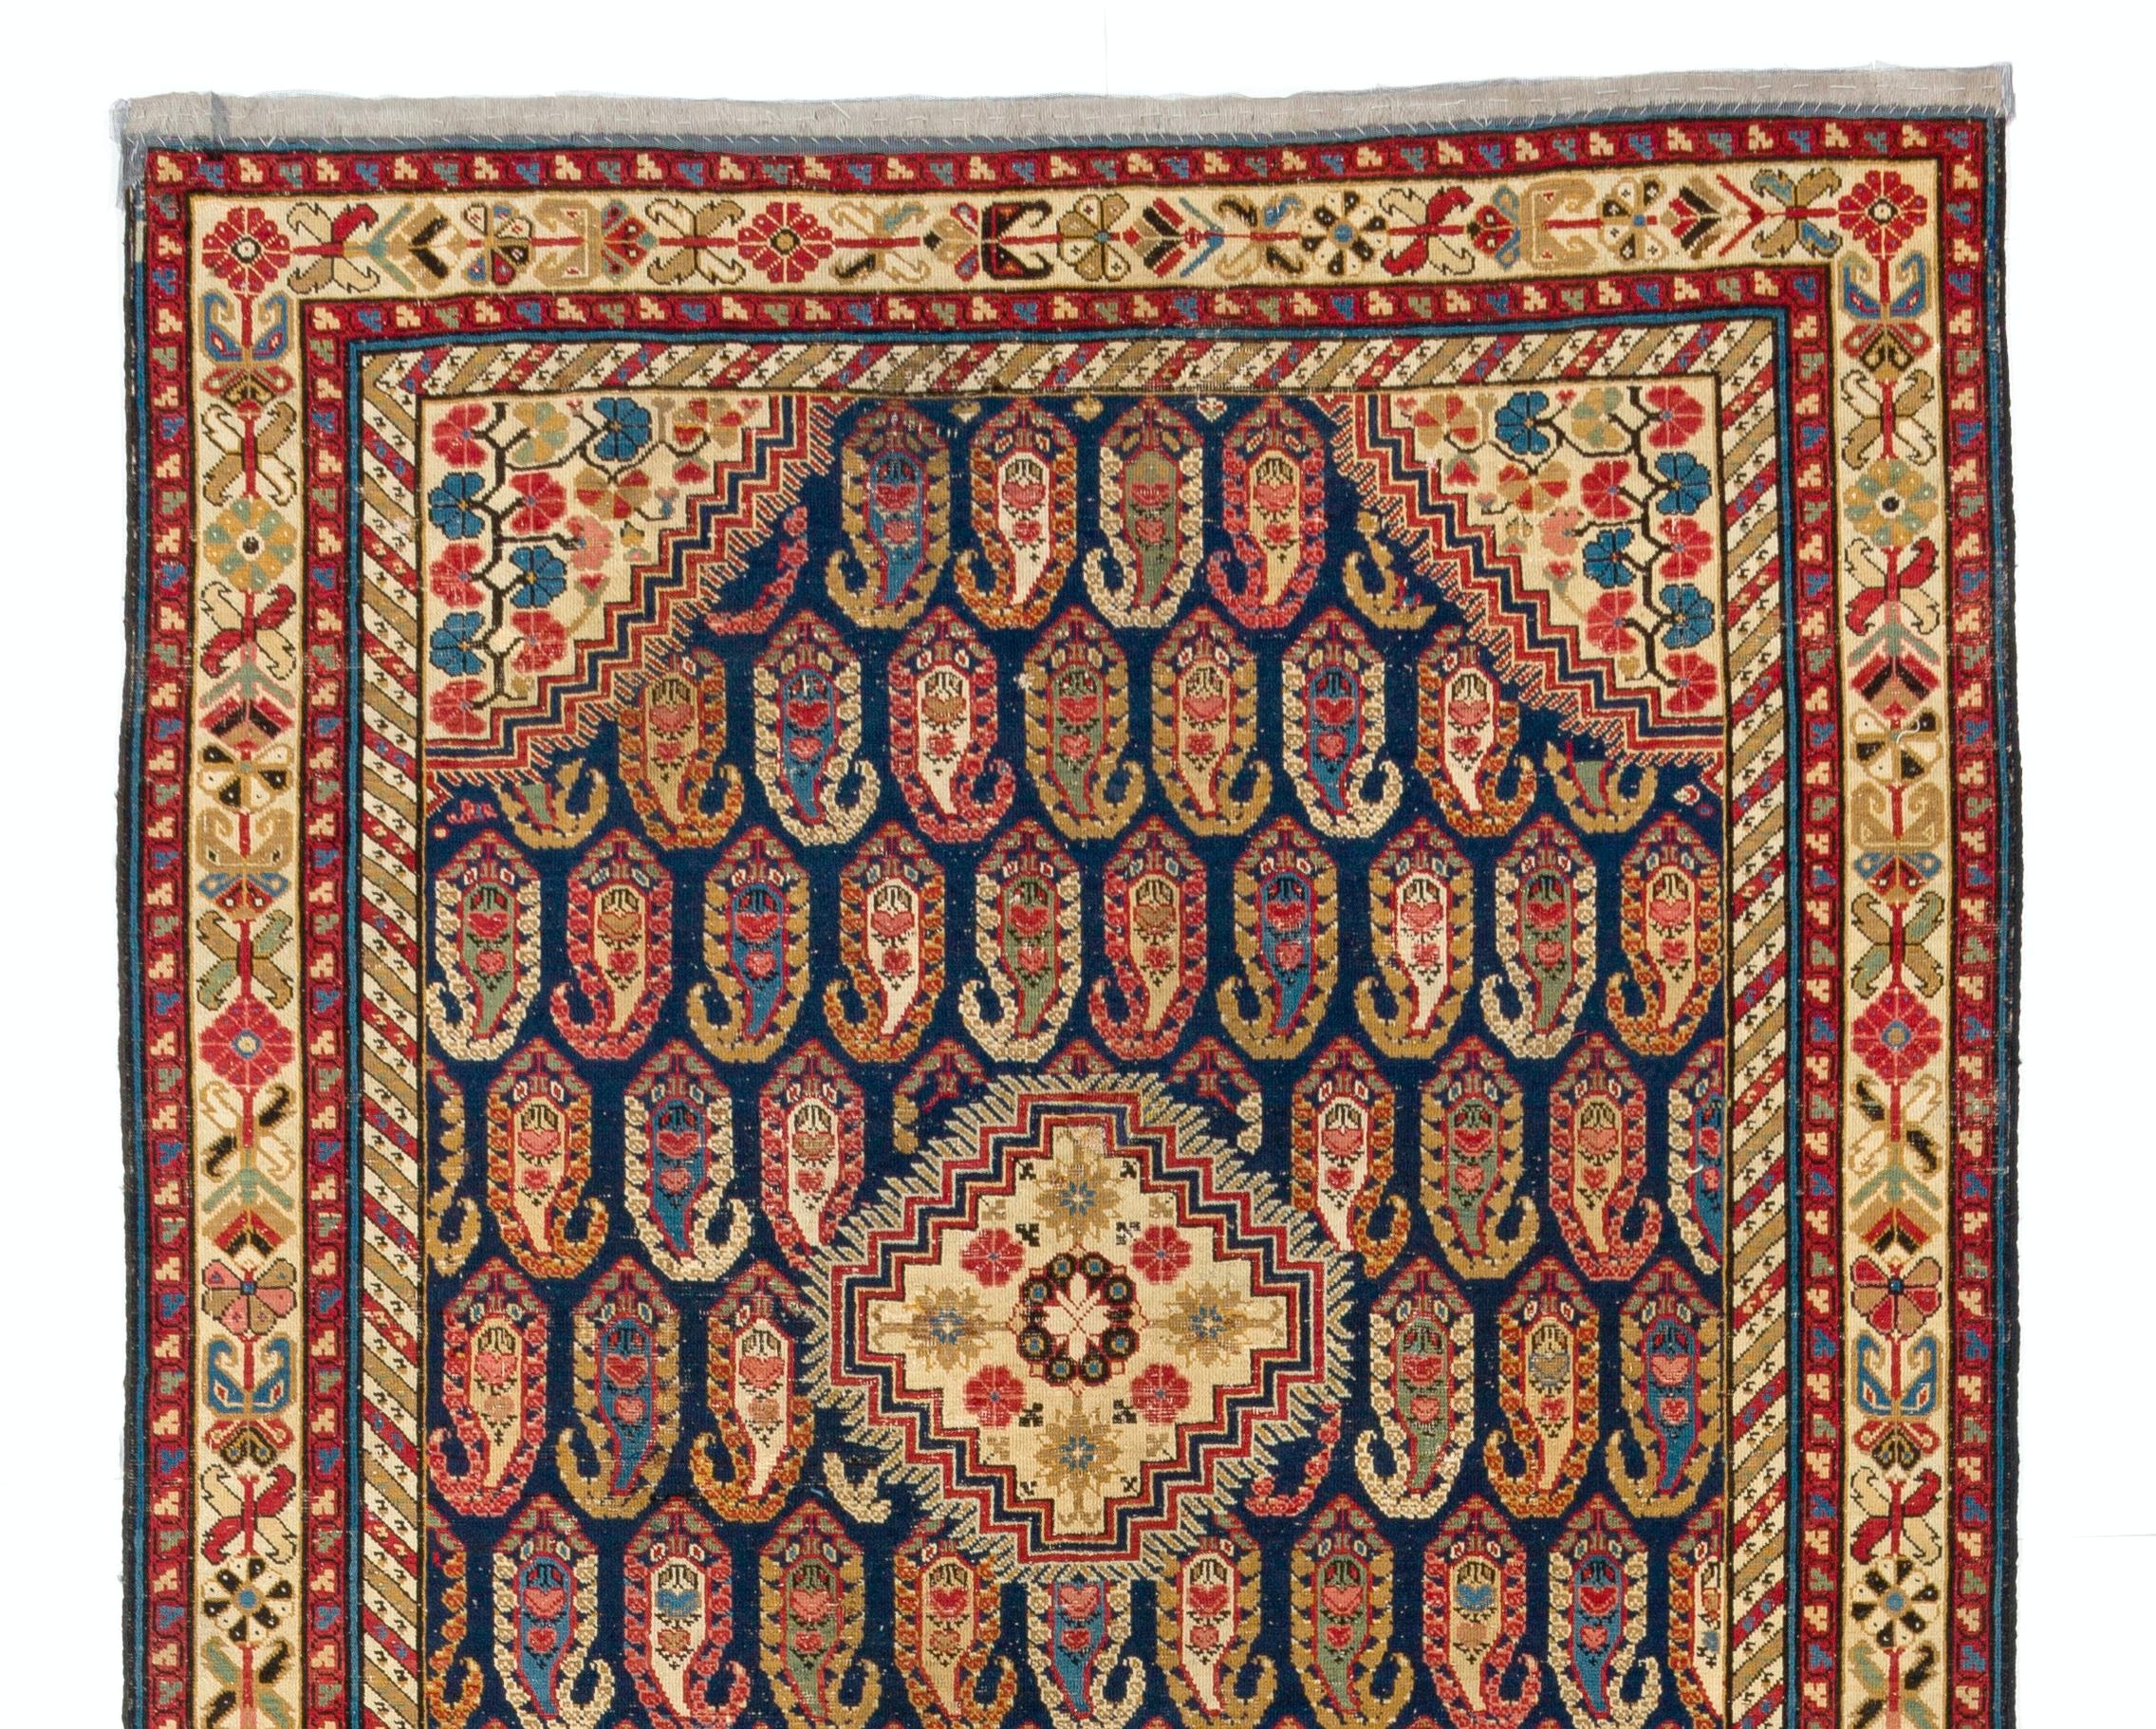 An early Caucasian Khila long rug in well preserved condition, circa 1800. Finely hand-knotted with even medium wool pile on cotton foundation. Very good condition. Sturdy and as clean as a brand new rug (deep washed professionally).
Size:4.6x12 ft